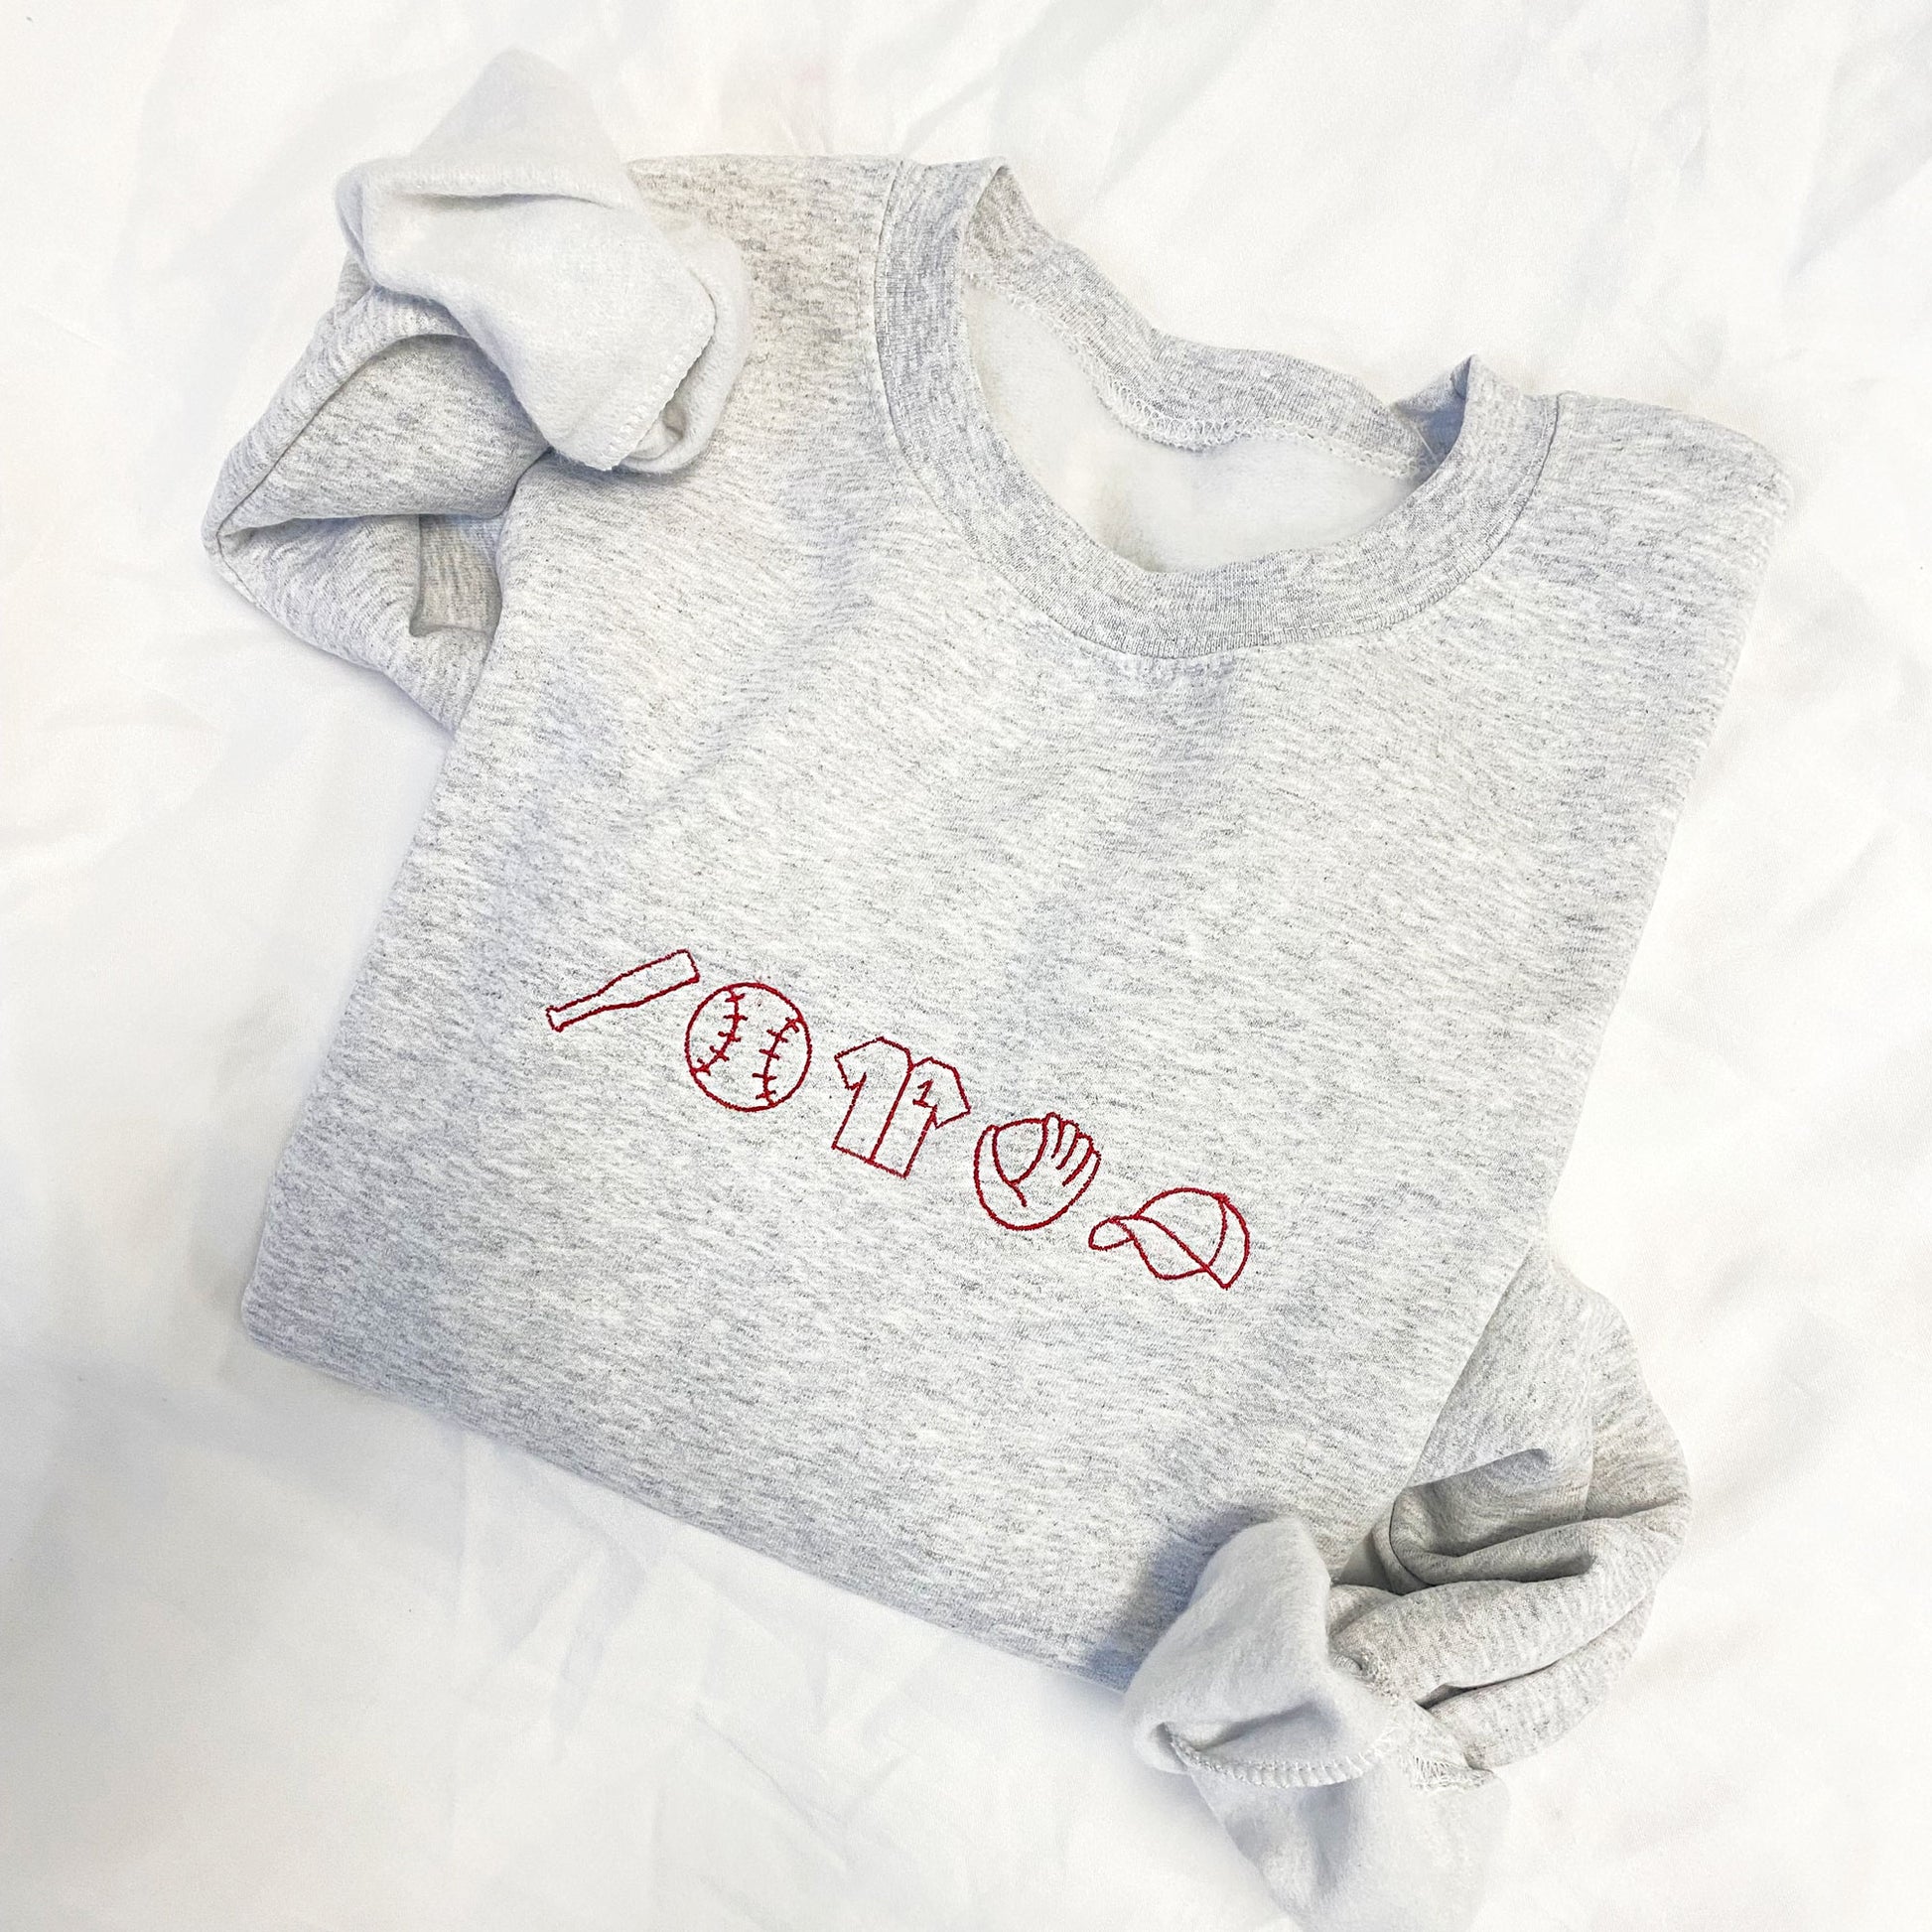 Ash crewneck sweatshirt with red embroidered baseball icons across the chest.